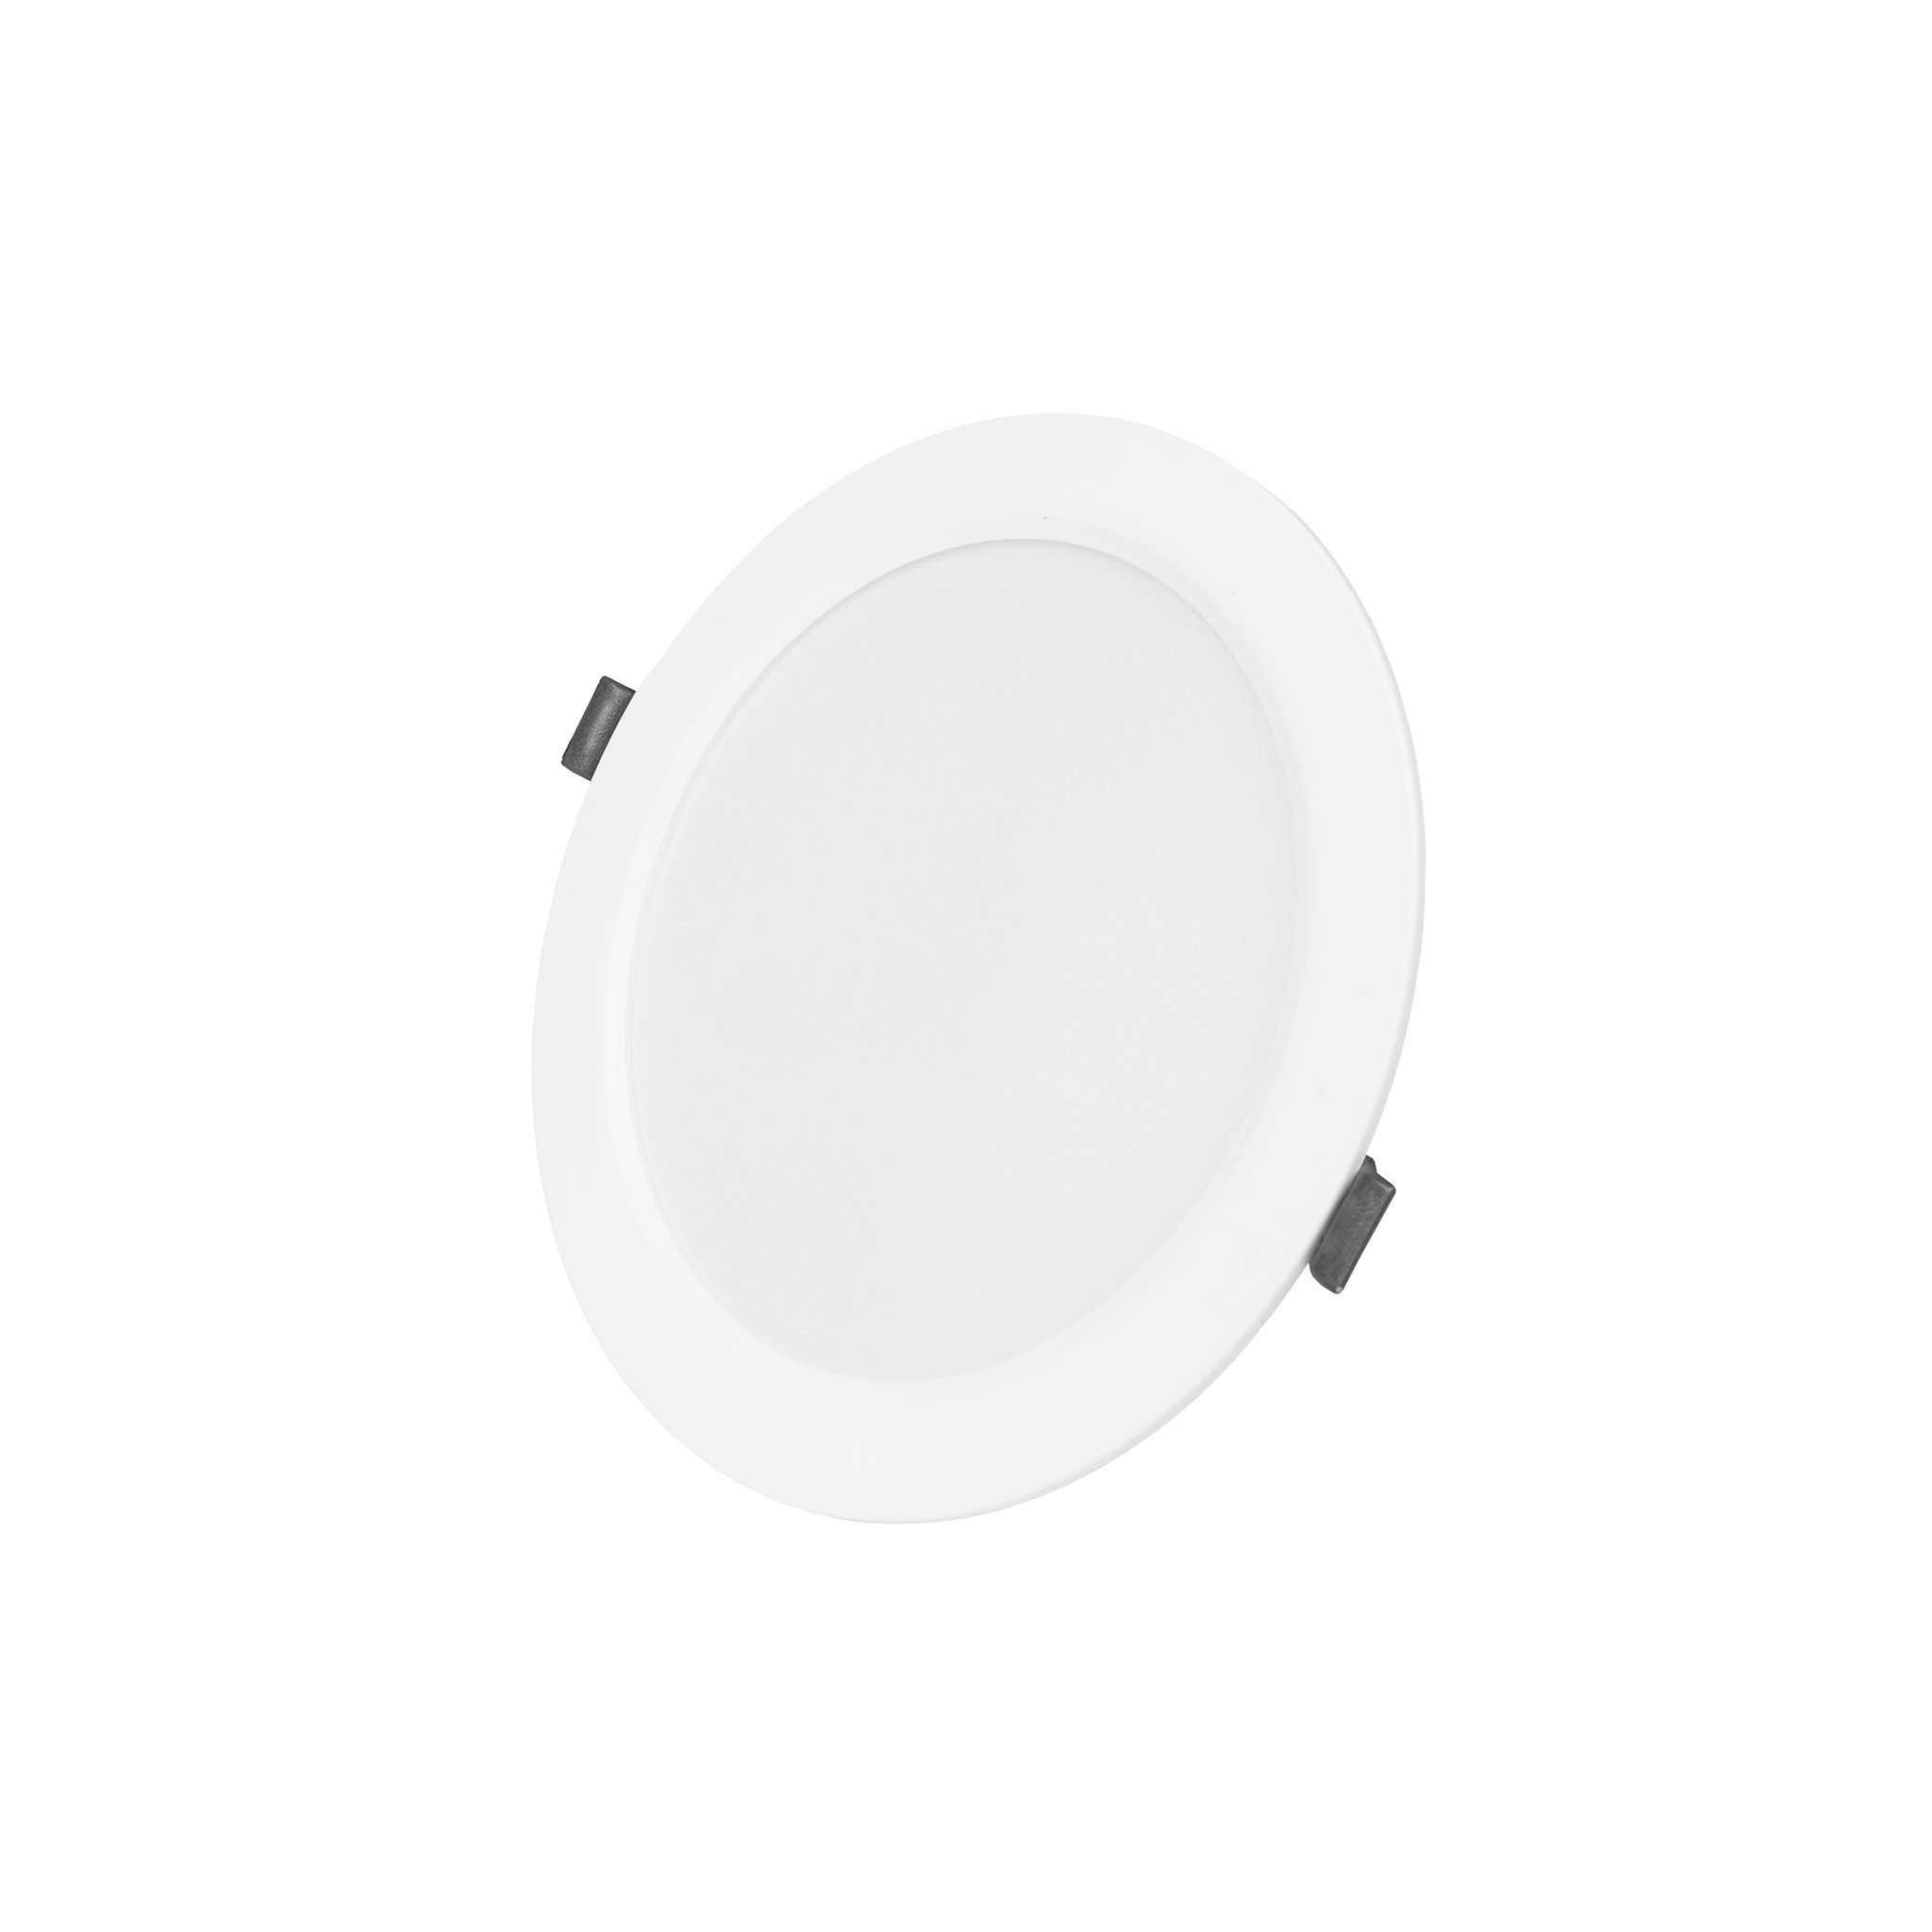 Downlight AGGE Ease - Flush-Mounted / Round, 175mm / 12W / 3000-6500K